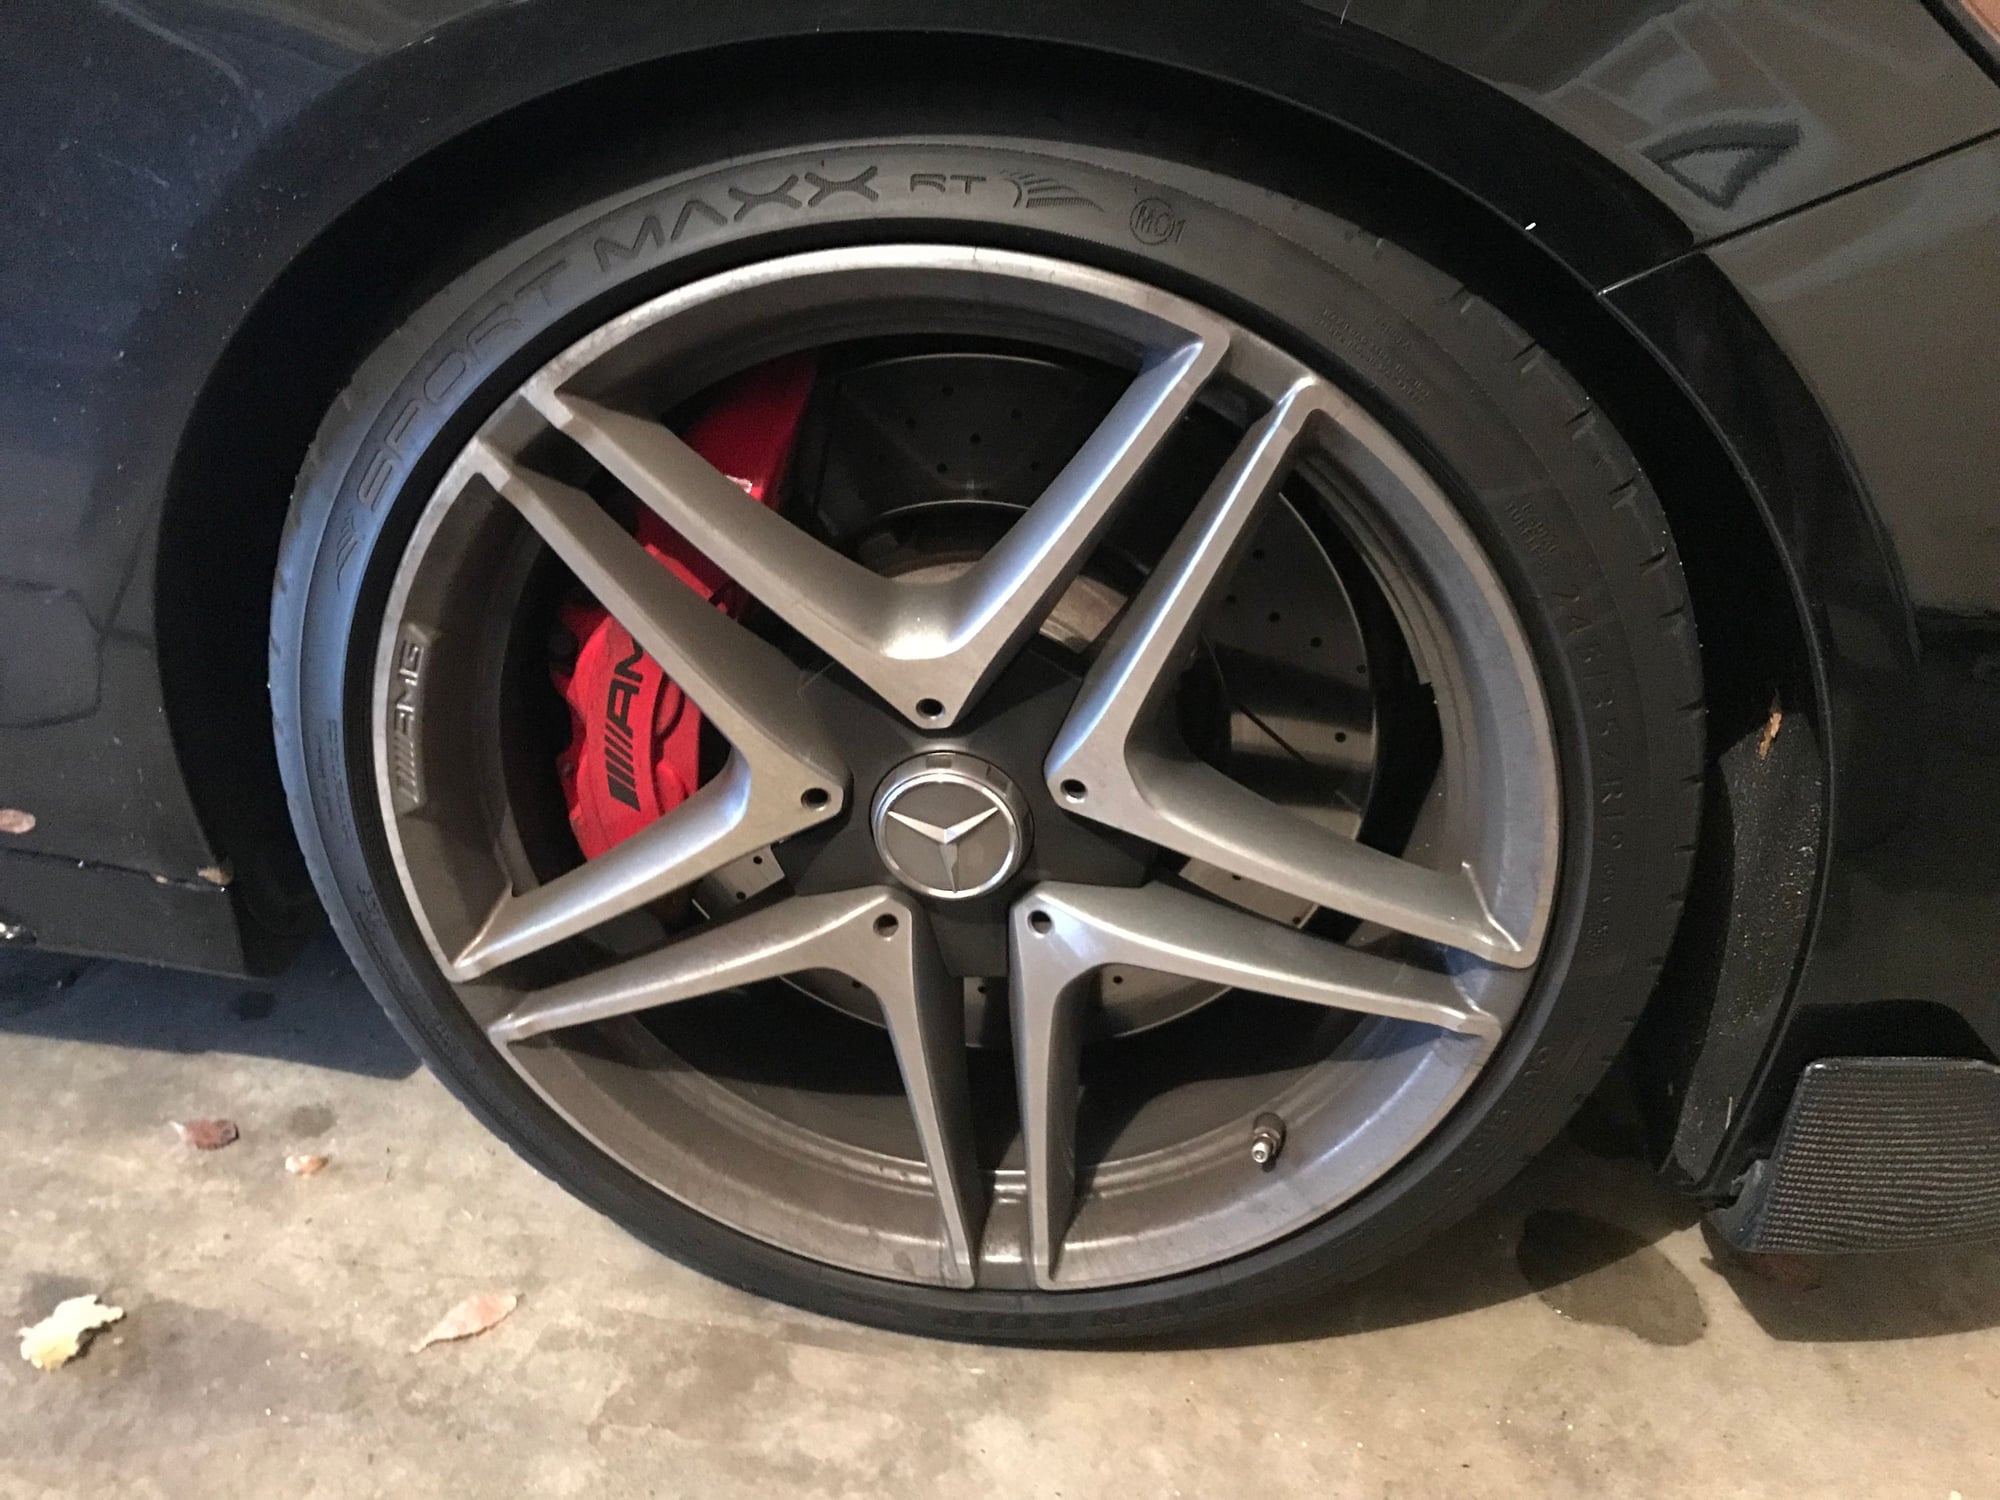 Wheels and Tires/Axles - Oem AMG 19" split 5 spoke wheels and tires - Used - 2015 to 2019 Mercedes-Benz All Models - Lincoln, CA 95648, United States